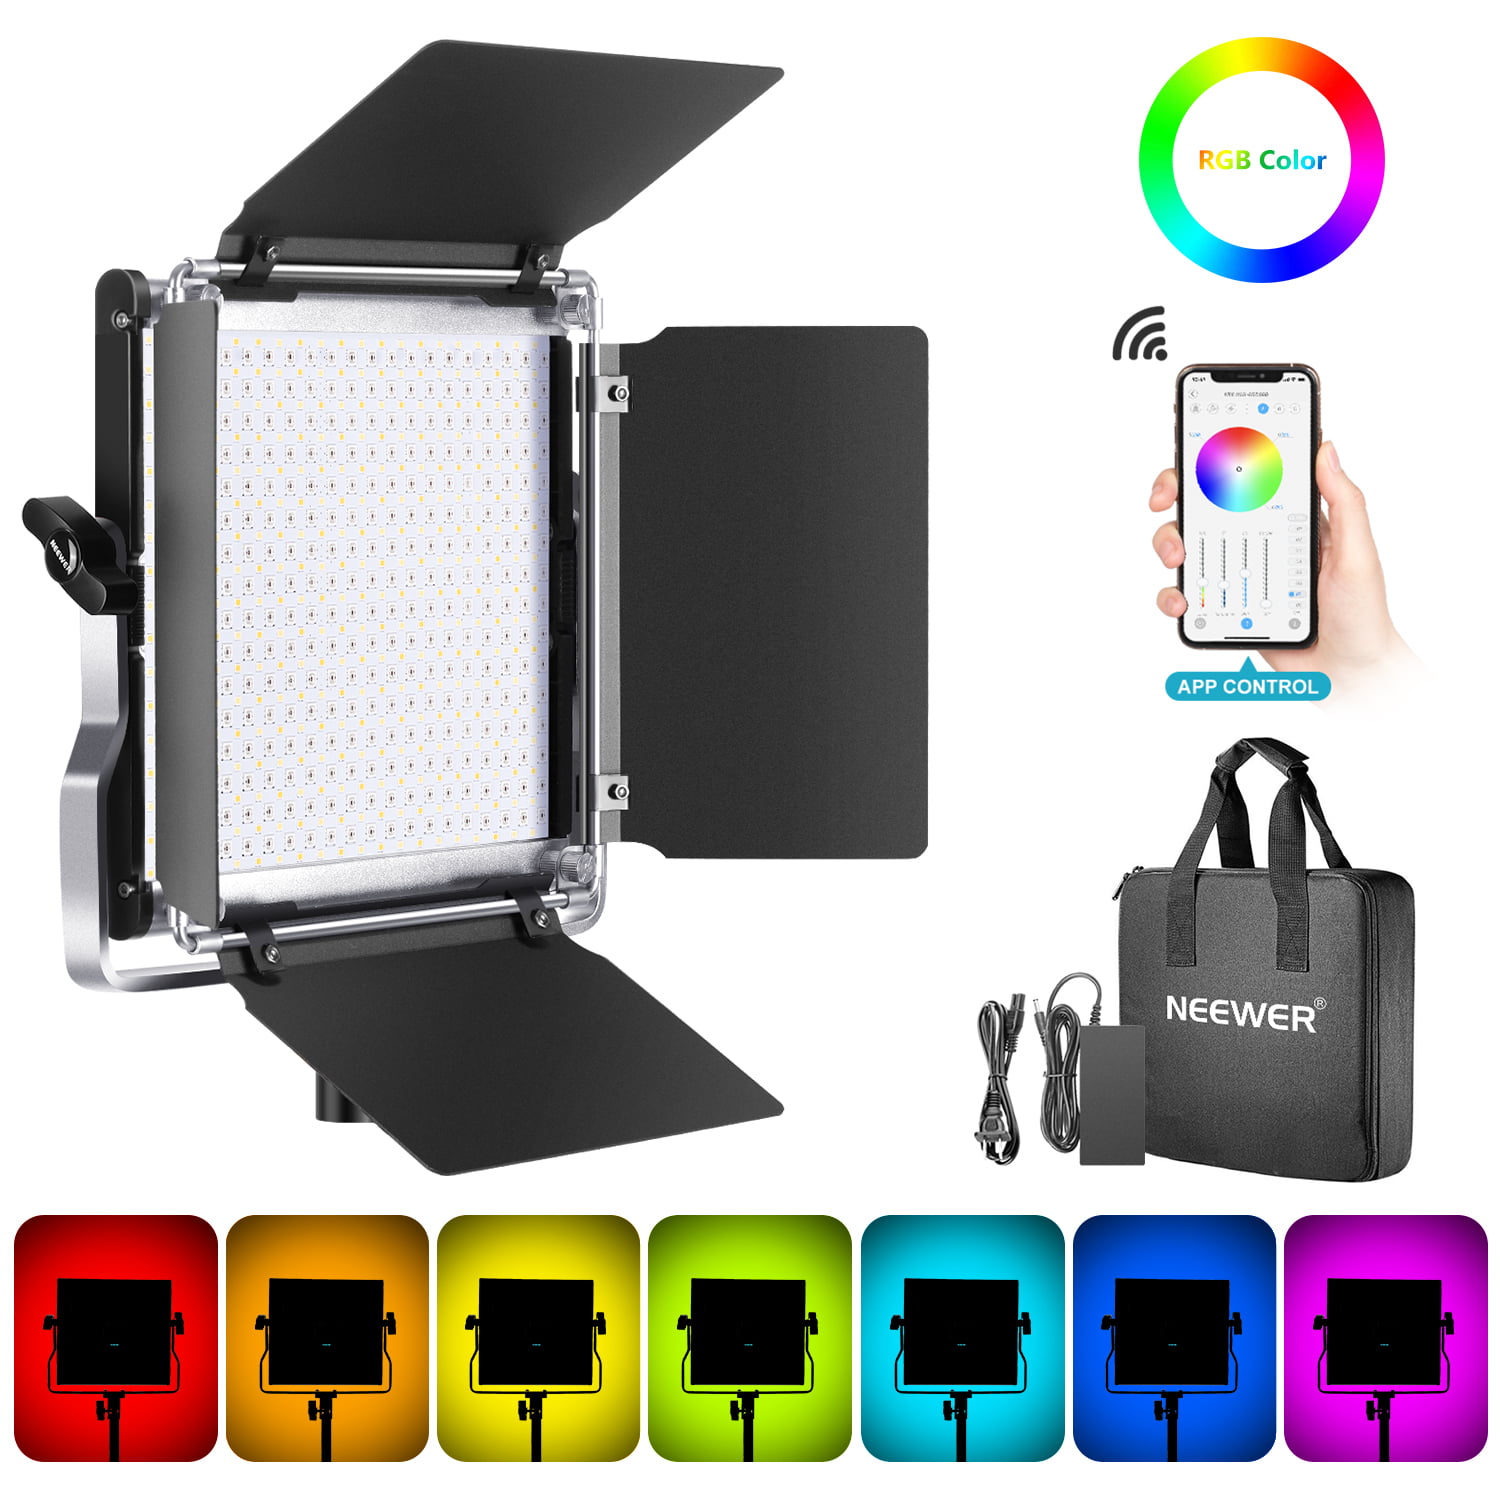 Neewer 660 RGB Led Light with APP Control, 660 SMD LEDs  CRI95/3200K-5600K/Brightness 0-100%/0-360 Adjustable Colors/9 Applicable  Scenes with LCD 